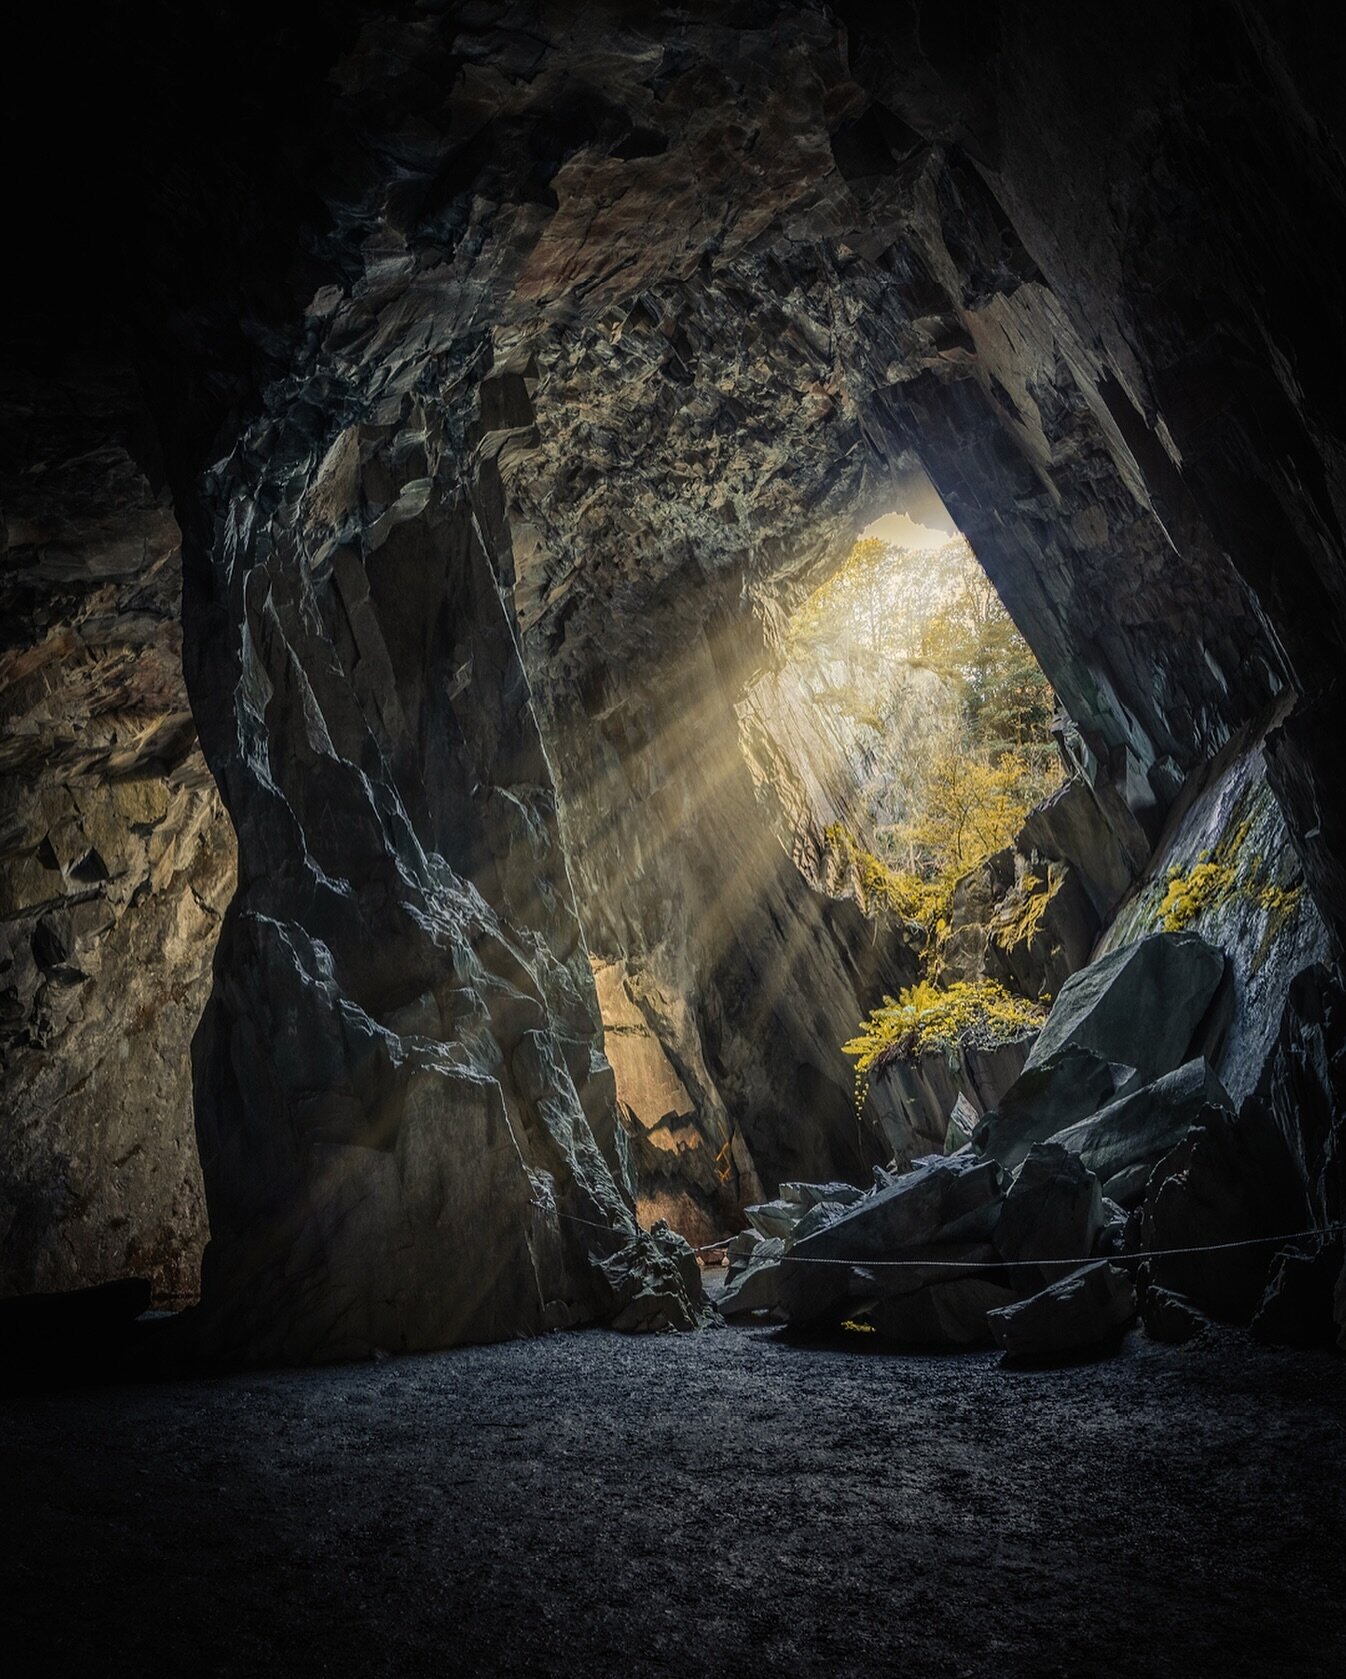 C A T H E D R A L  C A V E

Cathedral Cave, also known as Cathedral Quarry, is a fascinating geological feature located in the Little Langdale Valley within the #LakeDistrict National Park in #Cumbria. One particularly interesting aspect of this cave